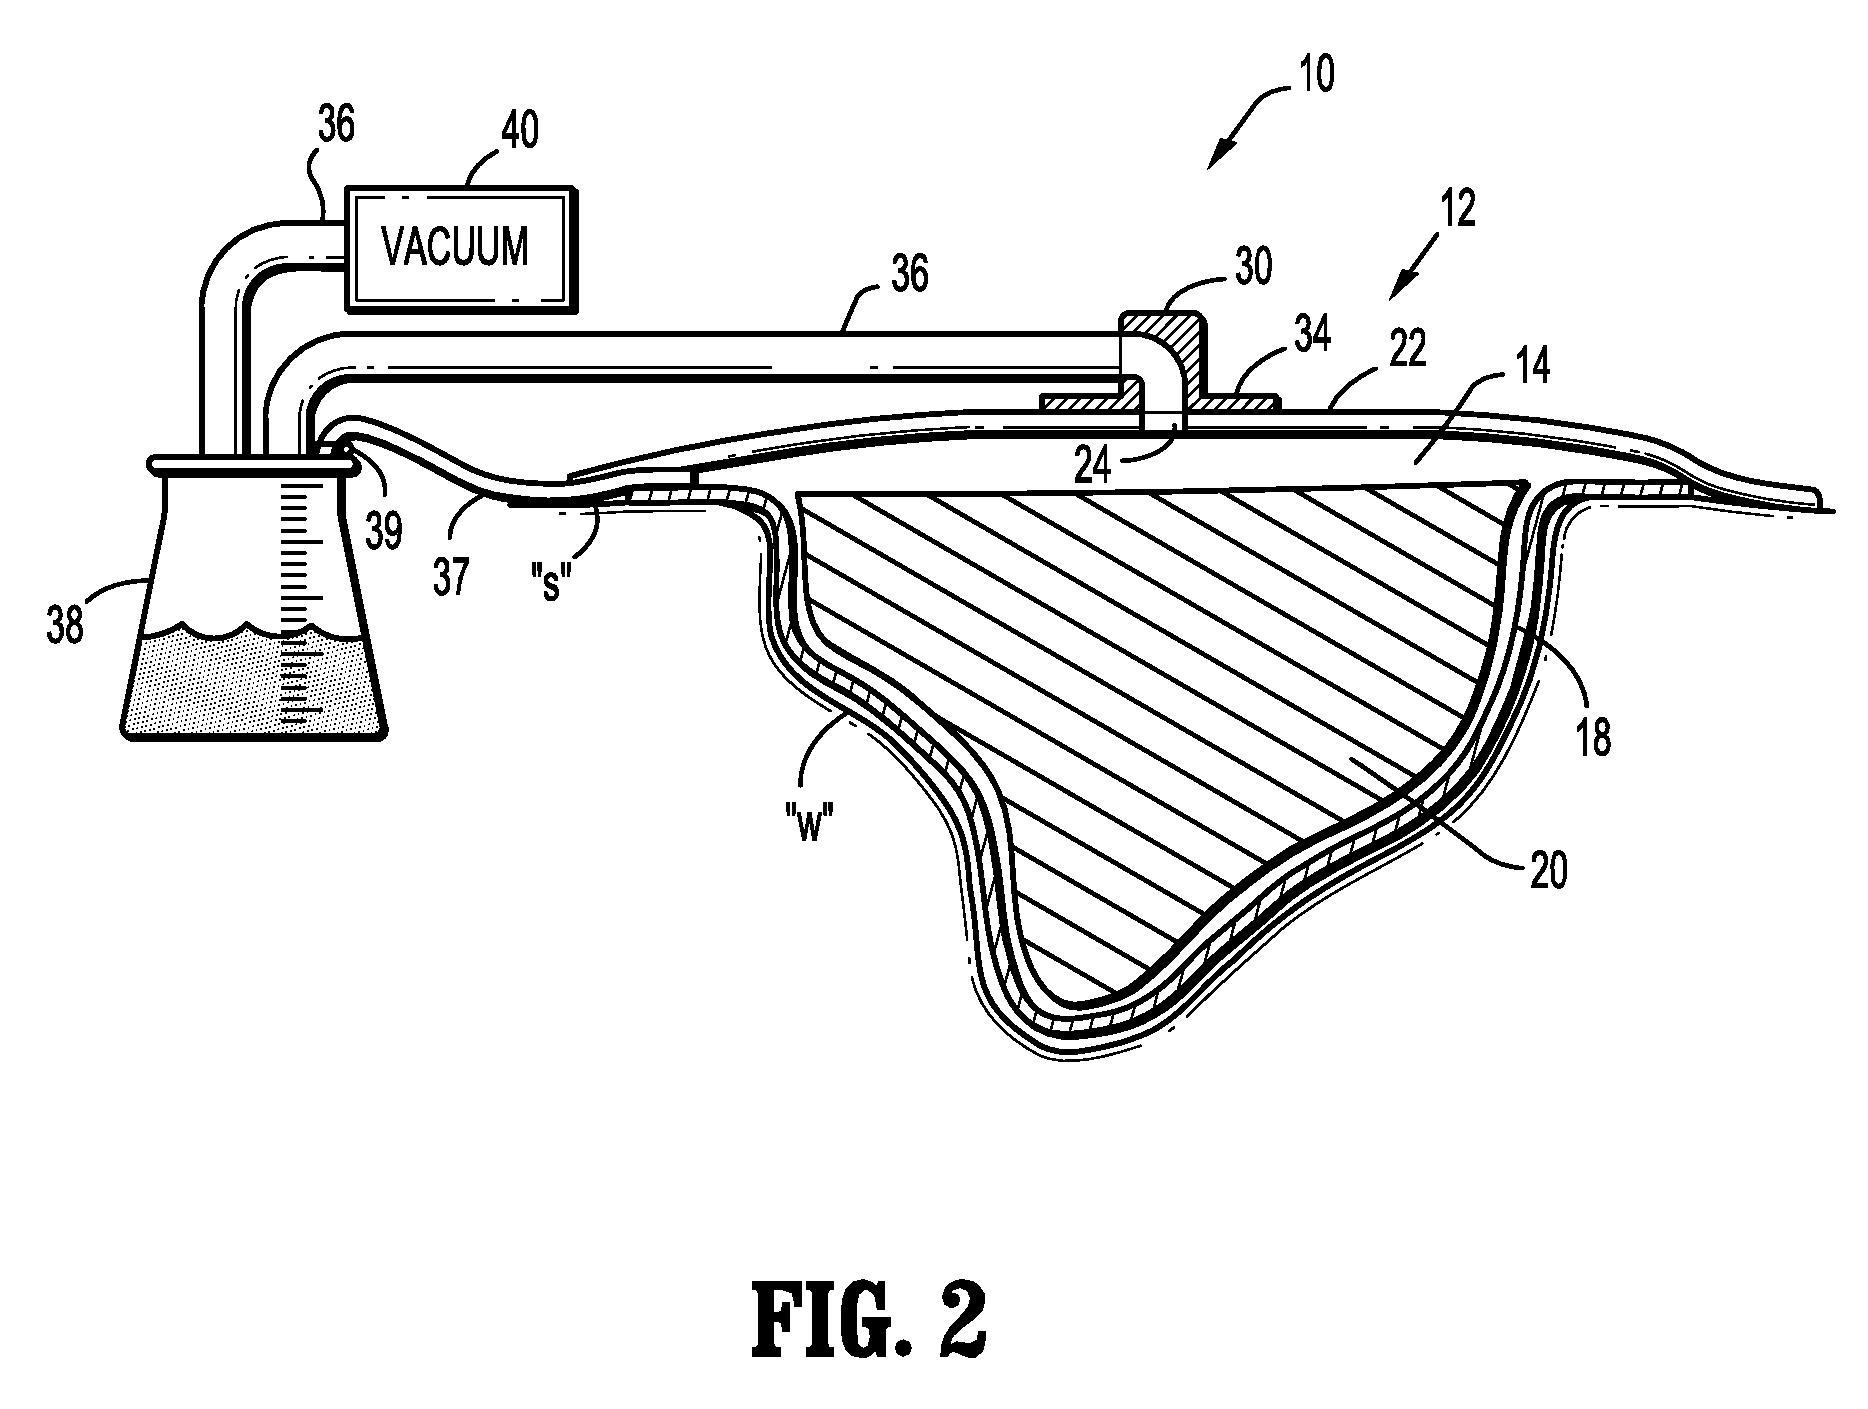 System for providing continual drainage in negative pressure wound therapy